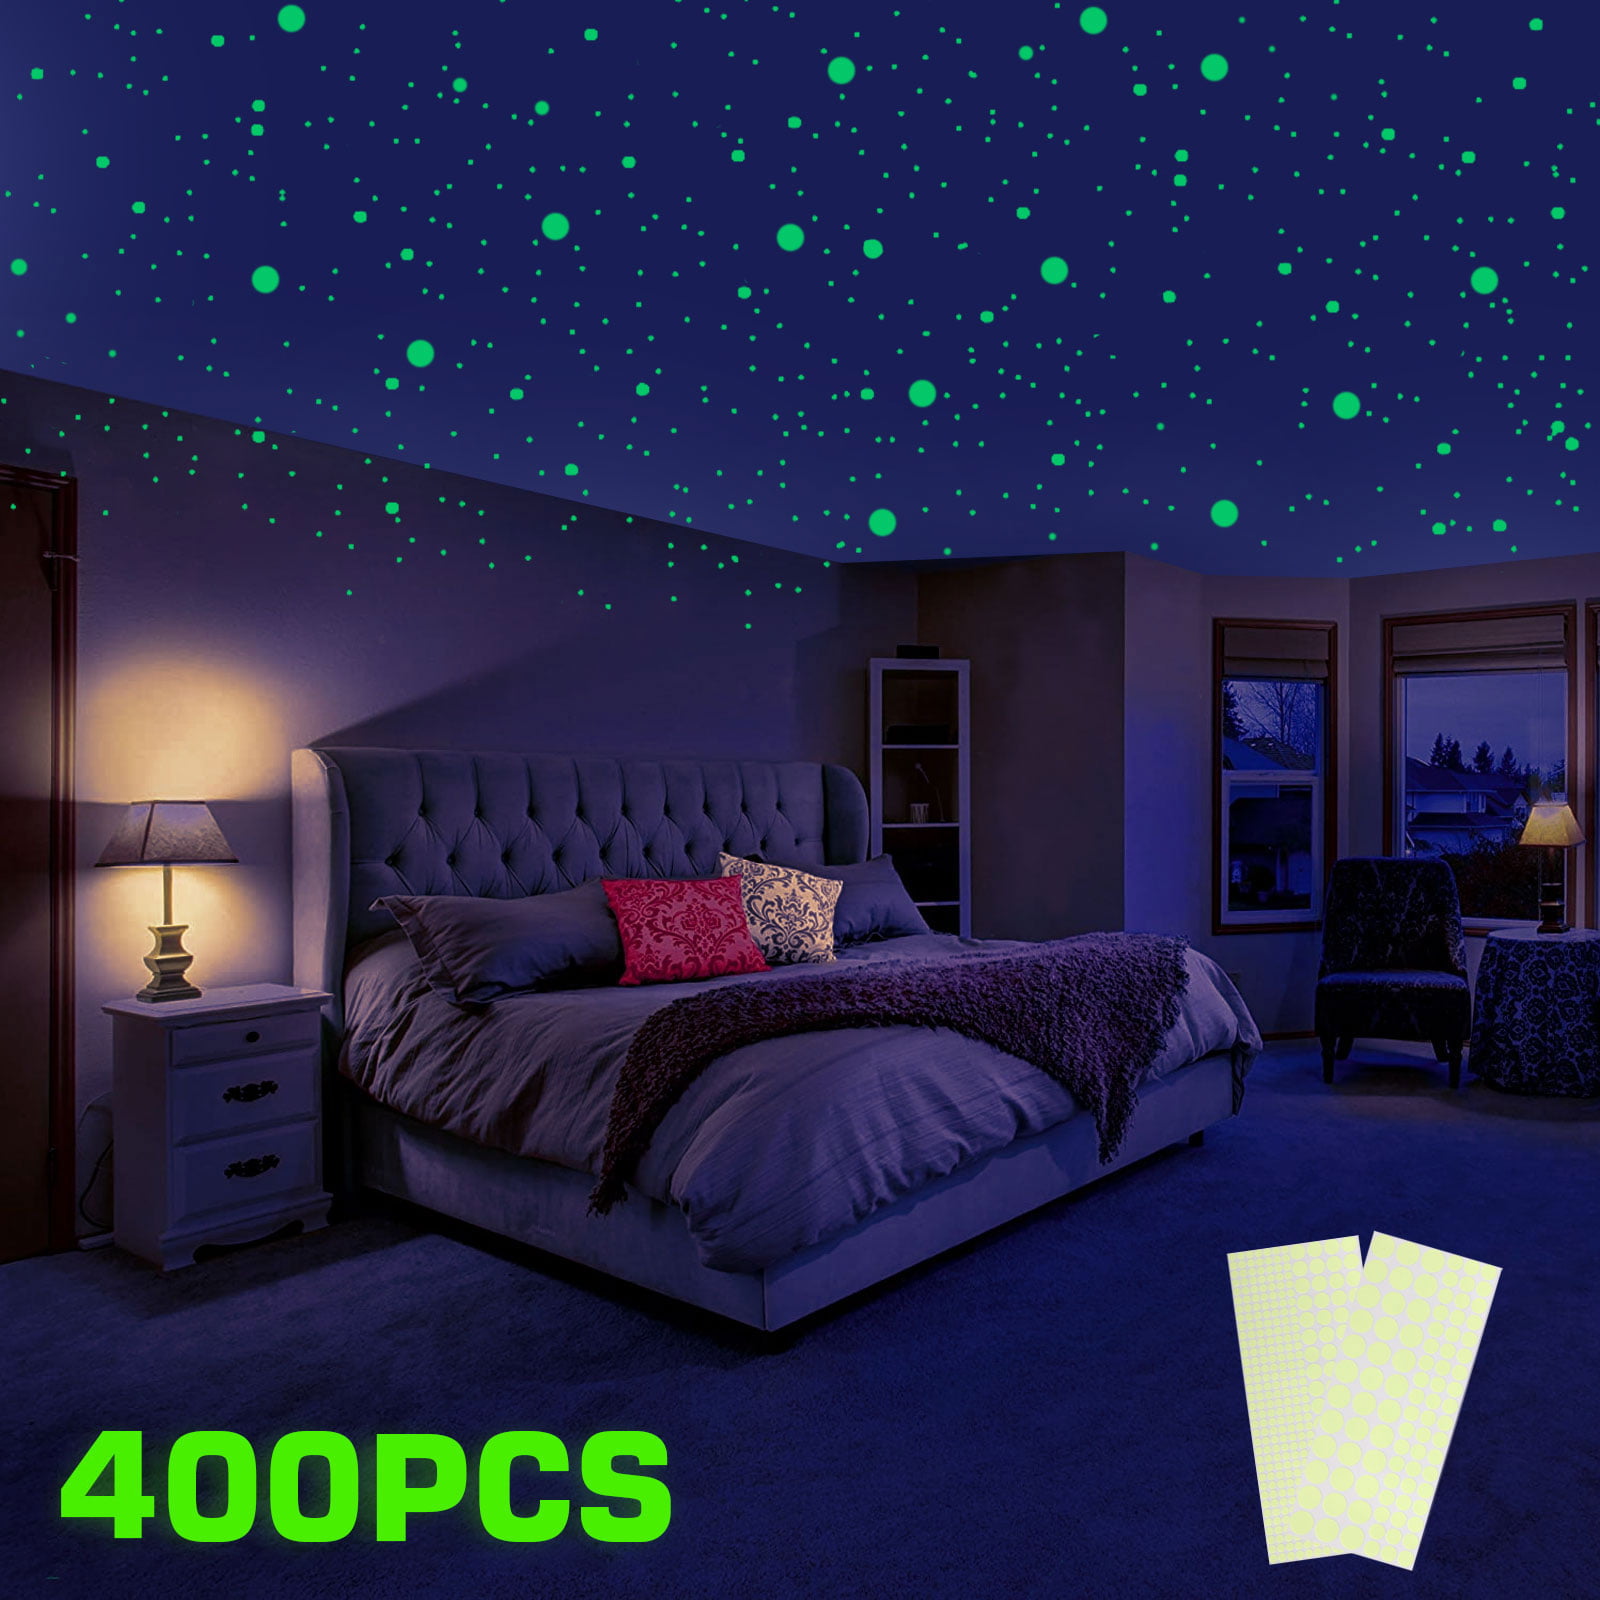 Fashion Home Wall Baby Room Bedroom Stars Moon Stickers Glow In The Dark Decor 